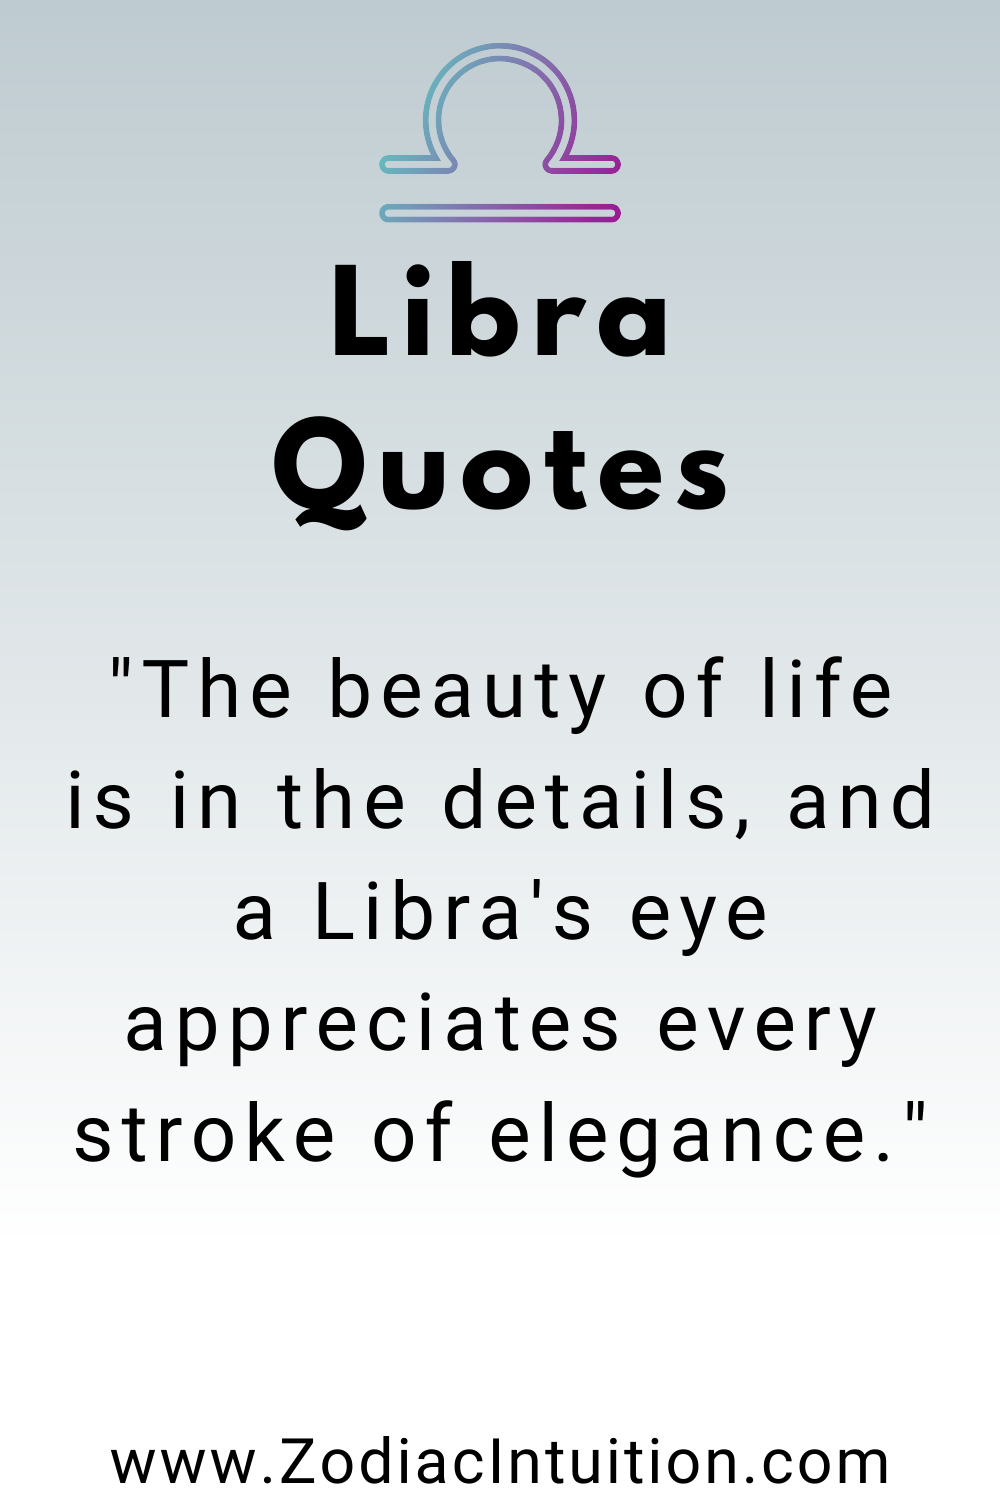 Top 5 Libra Quotes And Inspiration